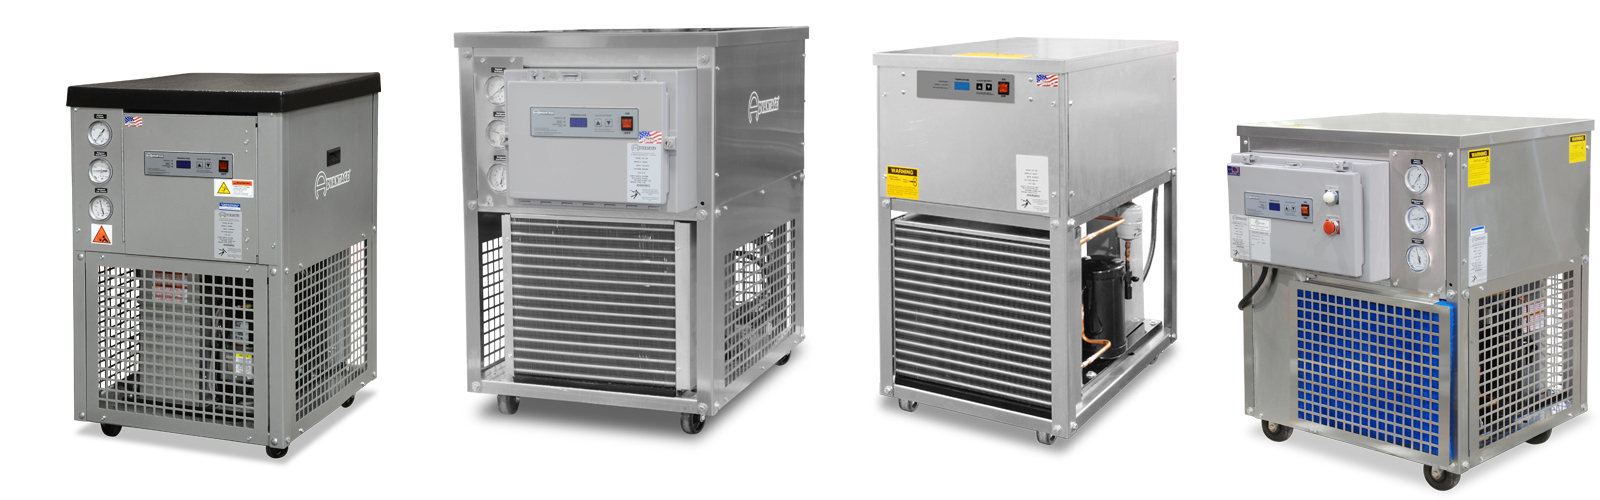 Small Water Chillers by Advantage